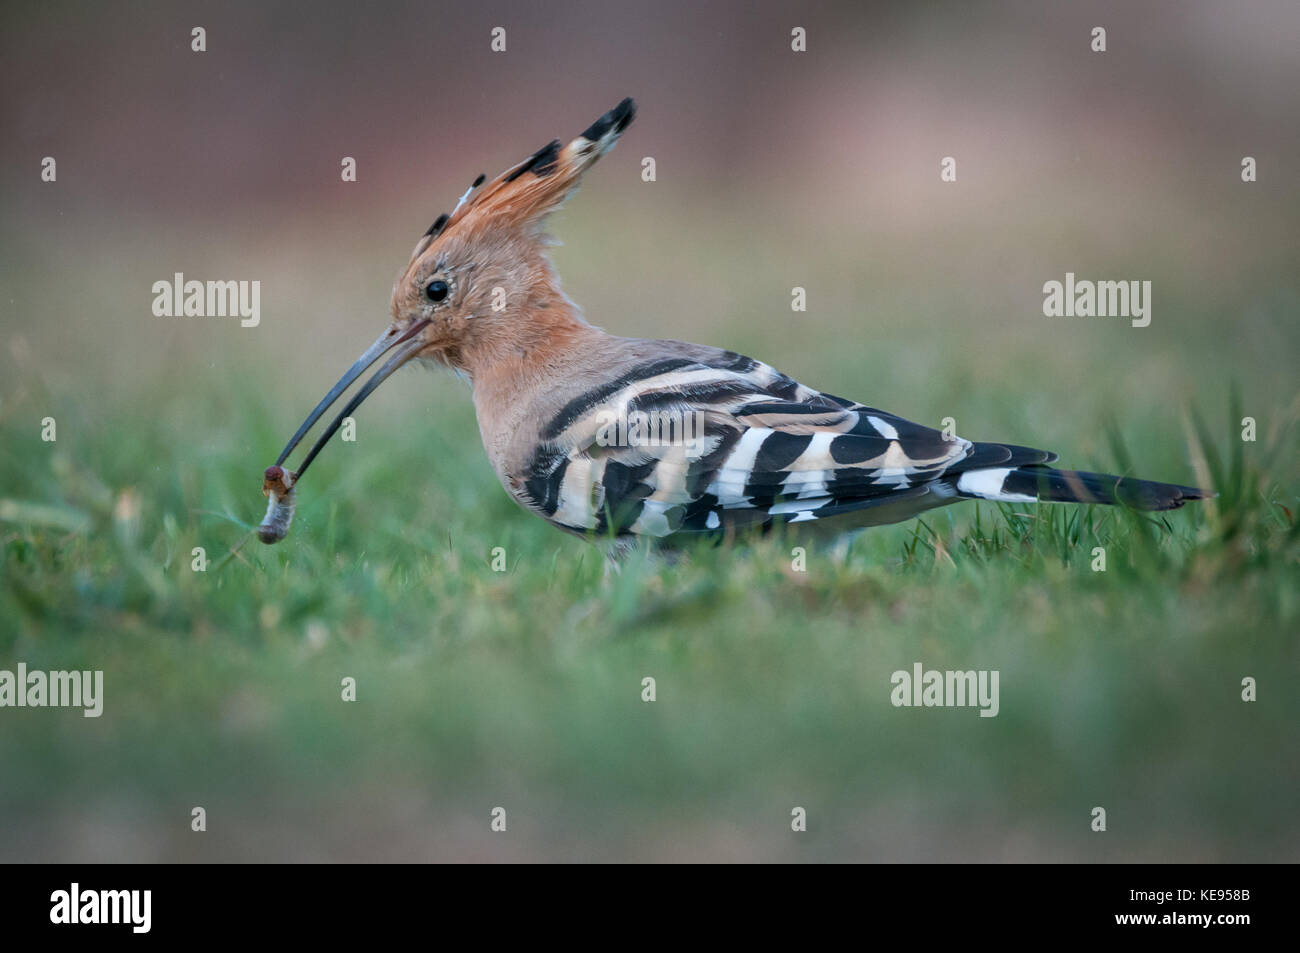 Hoopoe bird searching for worms in the fresh grass Stock Photo